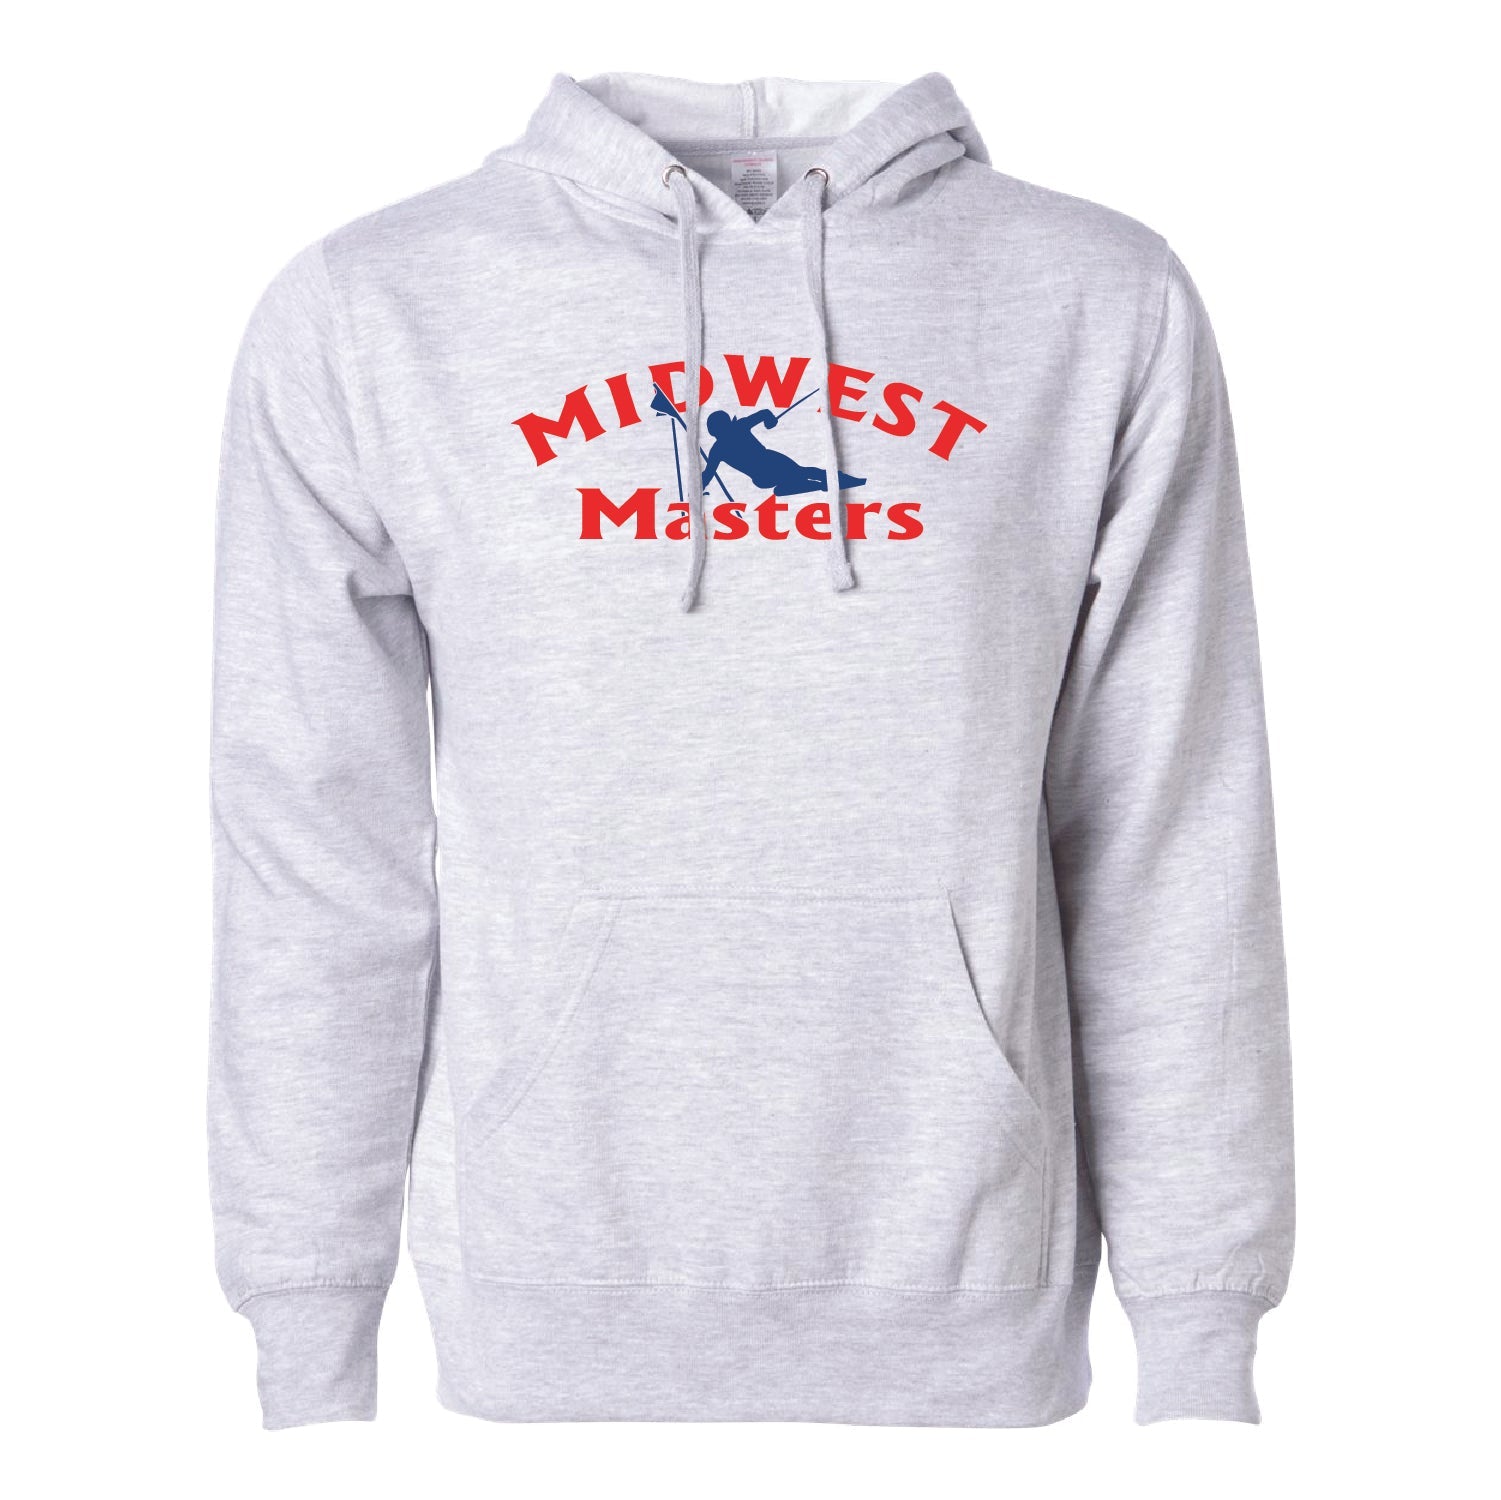 Midwest Masters Unisex Midweight Hooded Sweatshirt - DSP On Demand